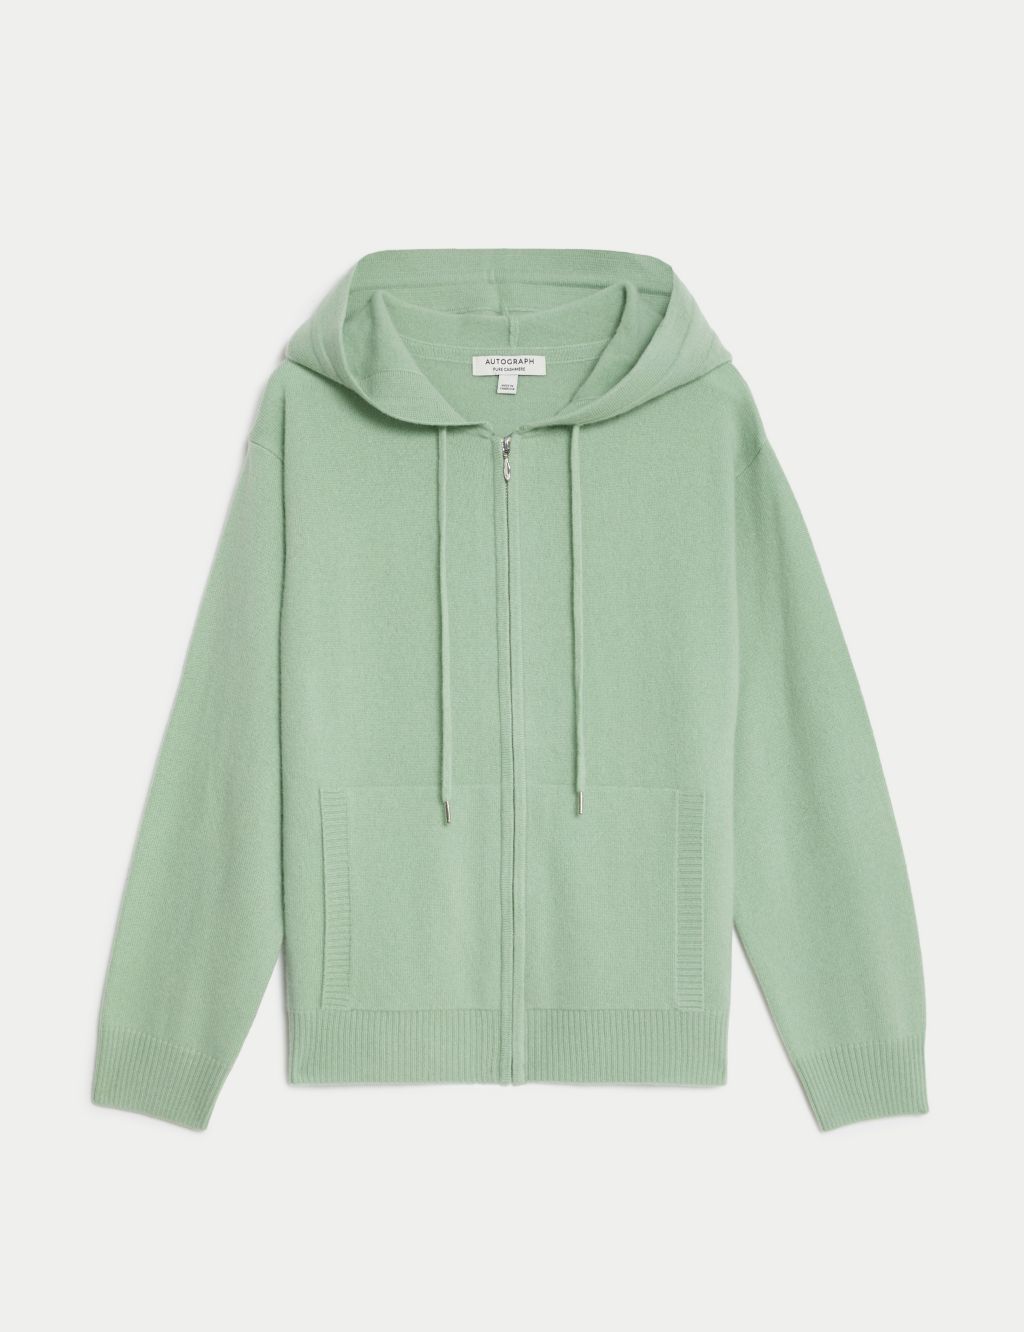 Pure Cashmere Zip Up Hoodie image 2